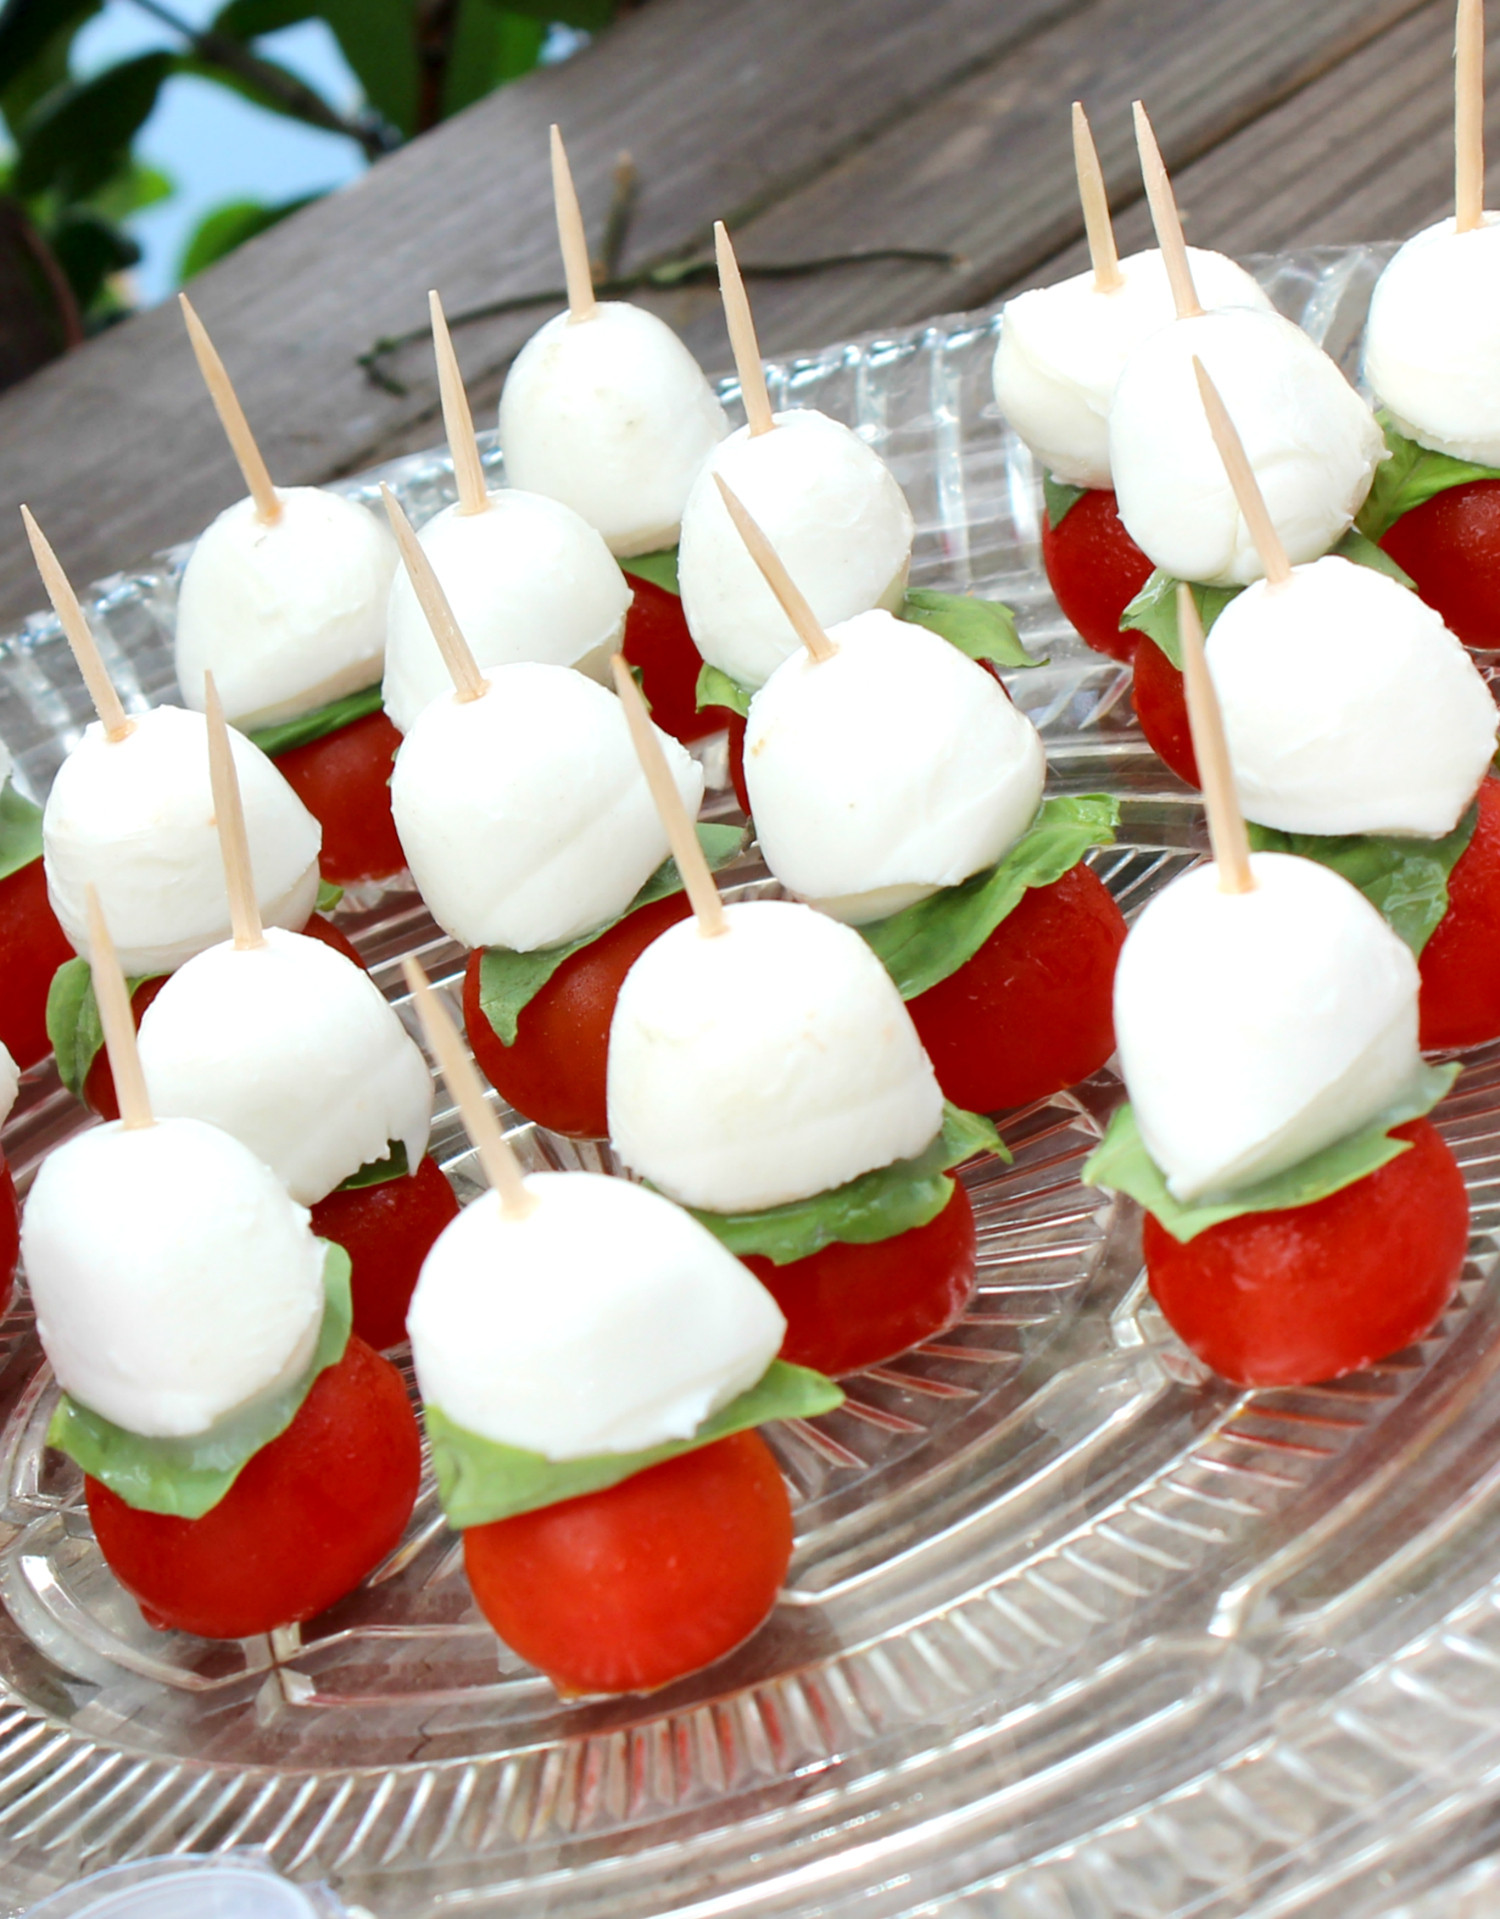 Summer Party Theme Ideas For Adults
 Fun Summer Pool Party Ideas for Adults